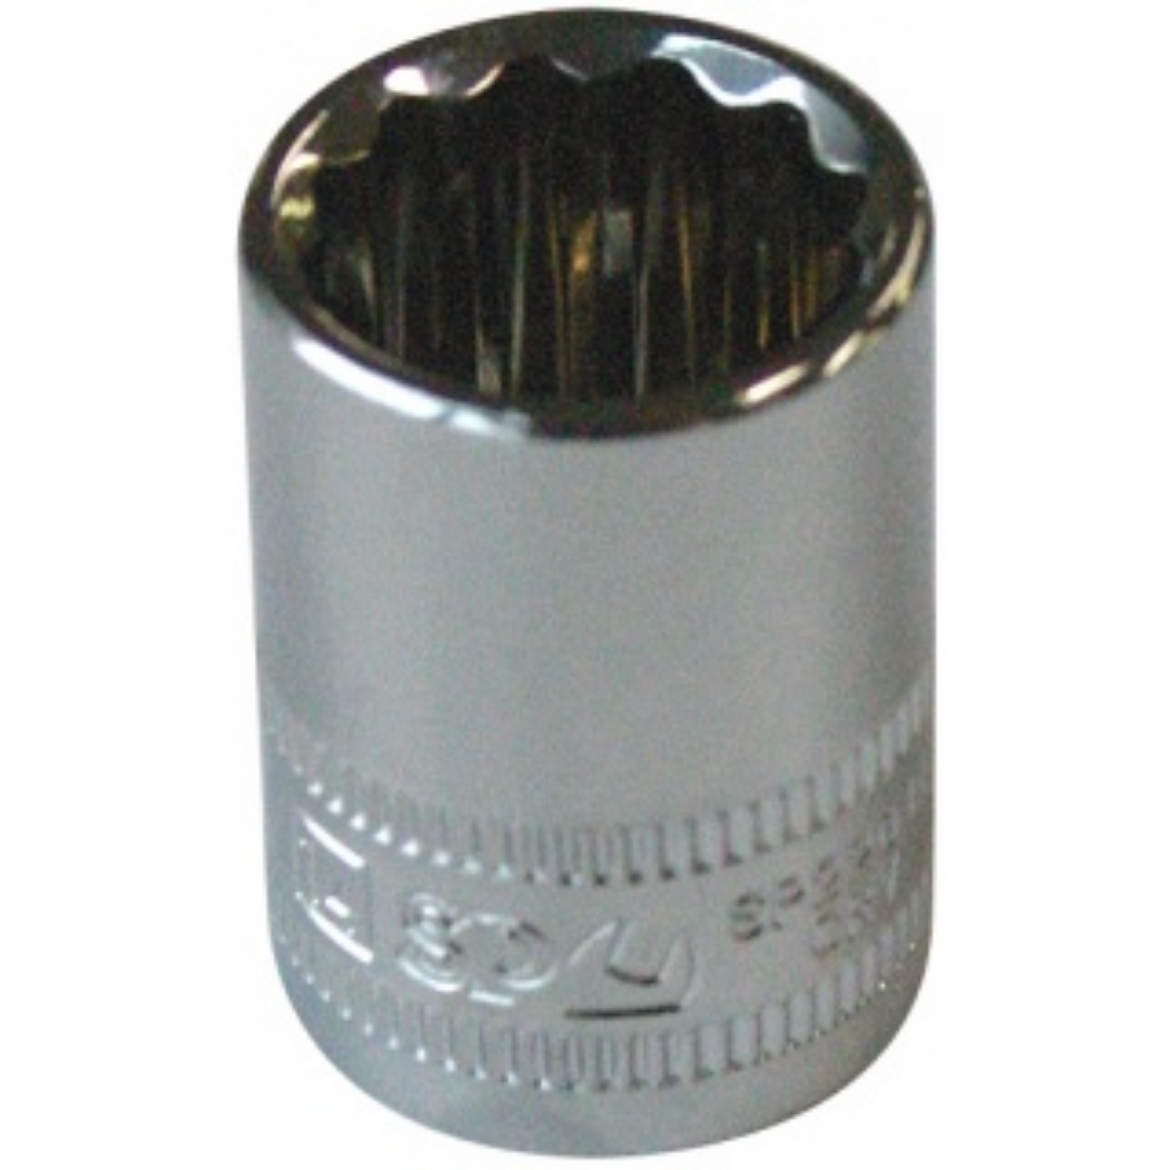 Picture of SOCKET 3/8"DR 12PT METRIC 12MM SP TOOLS